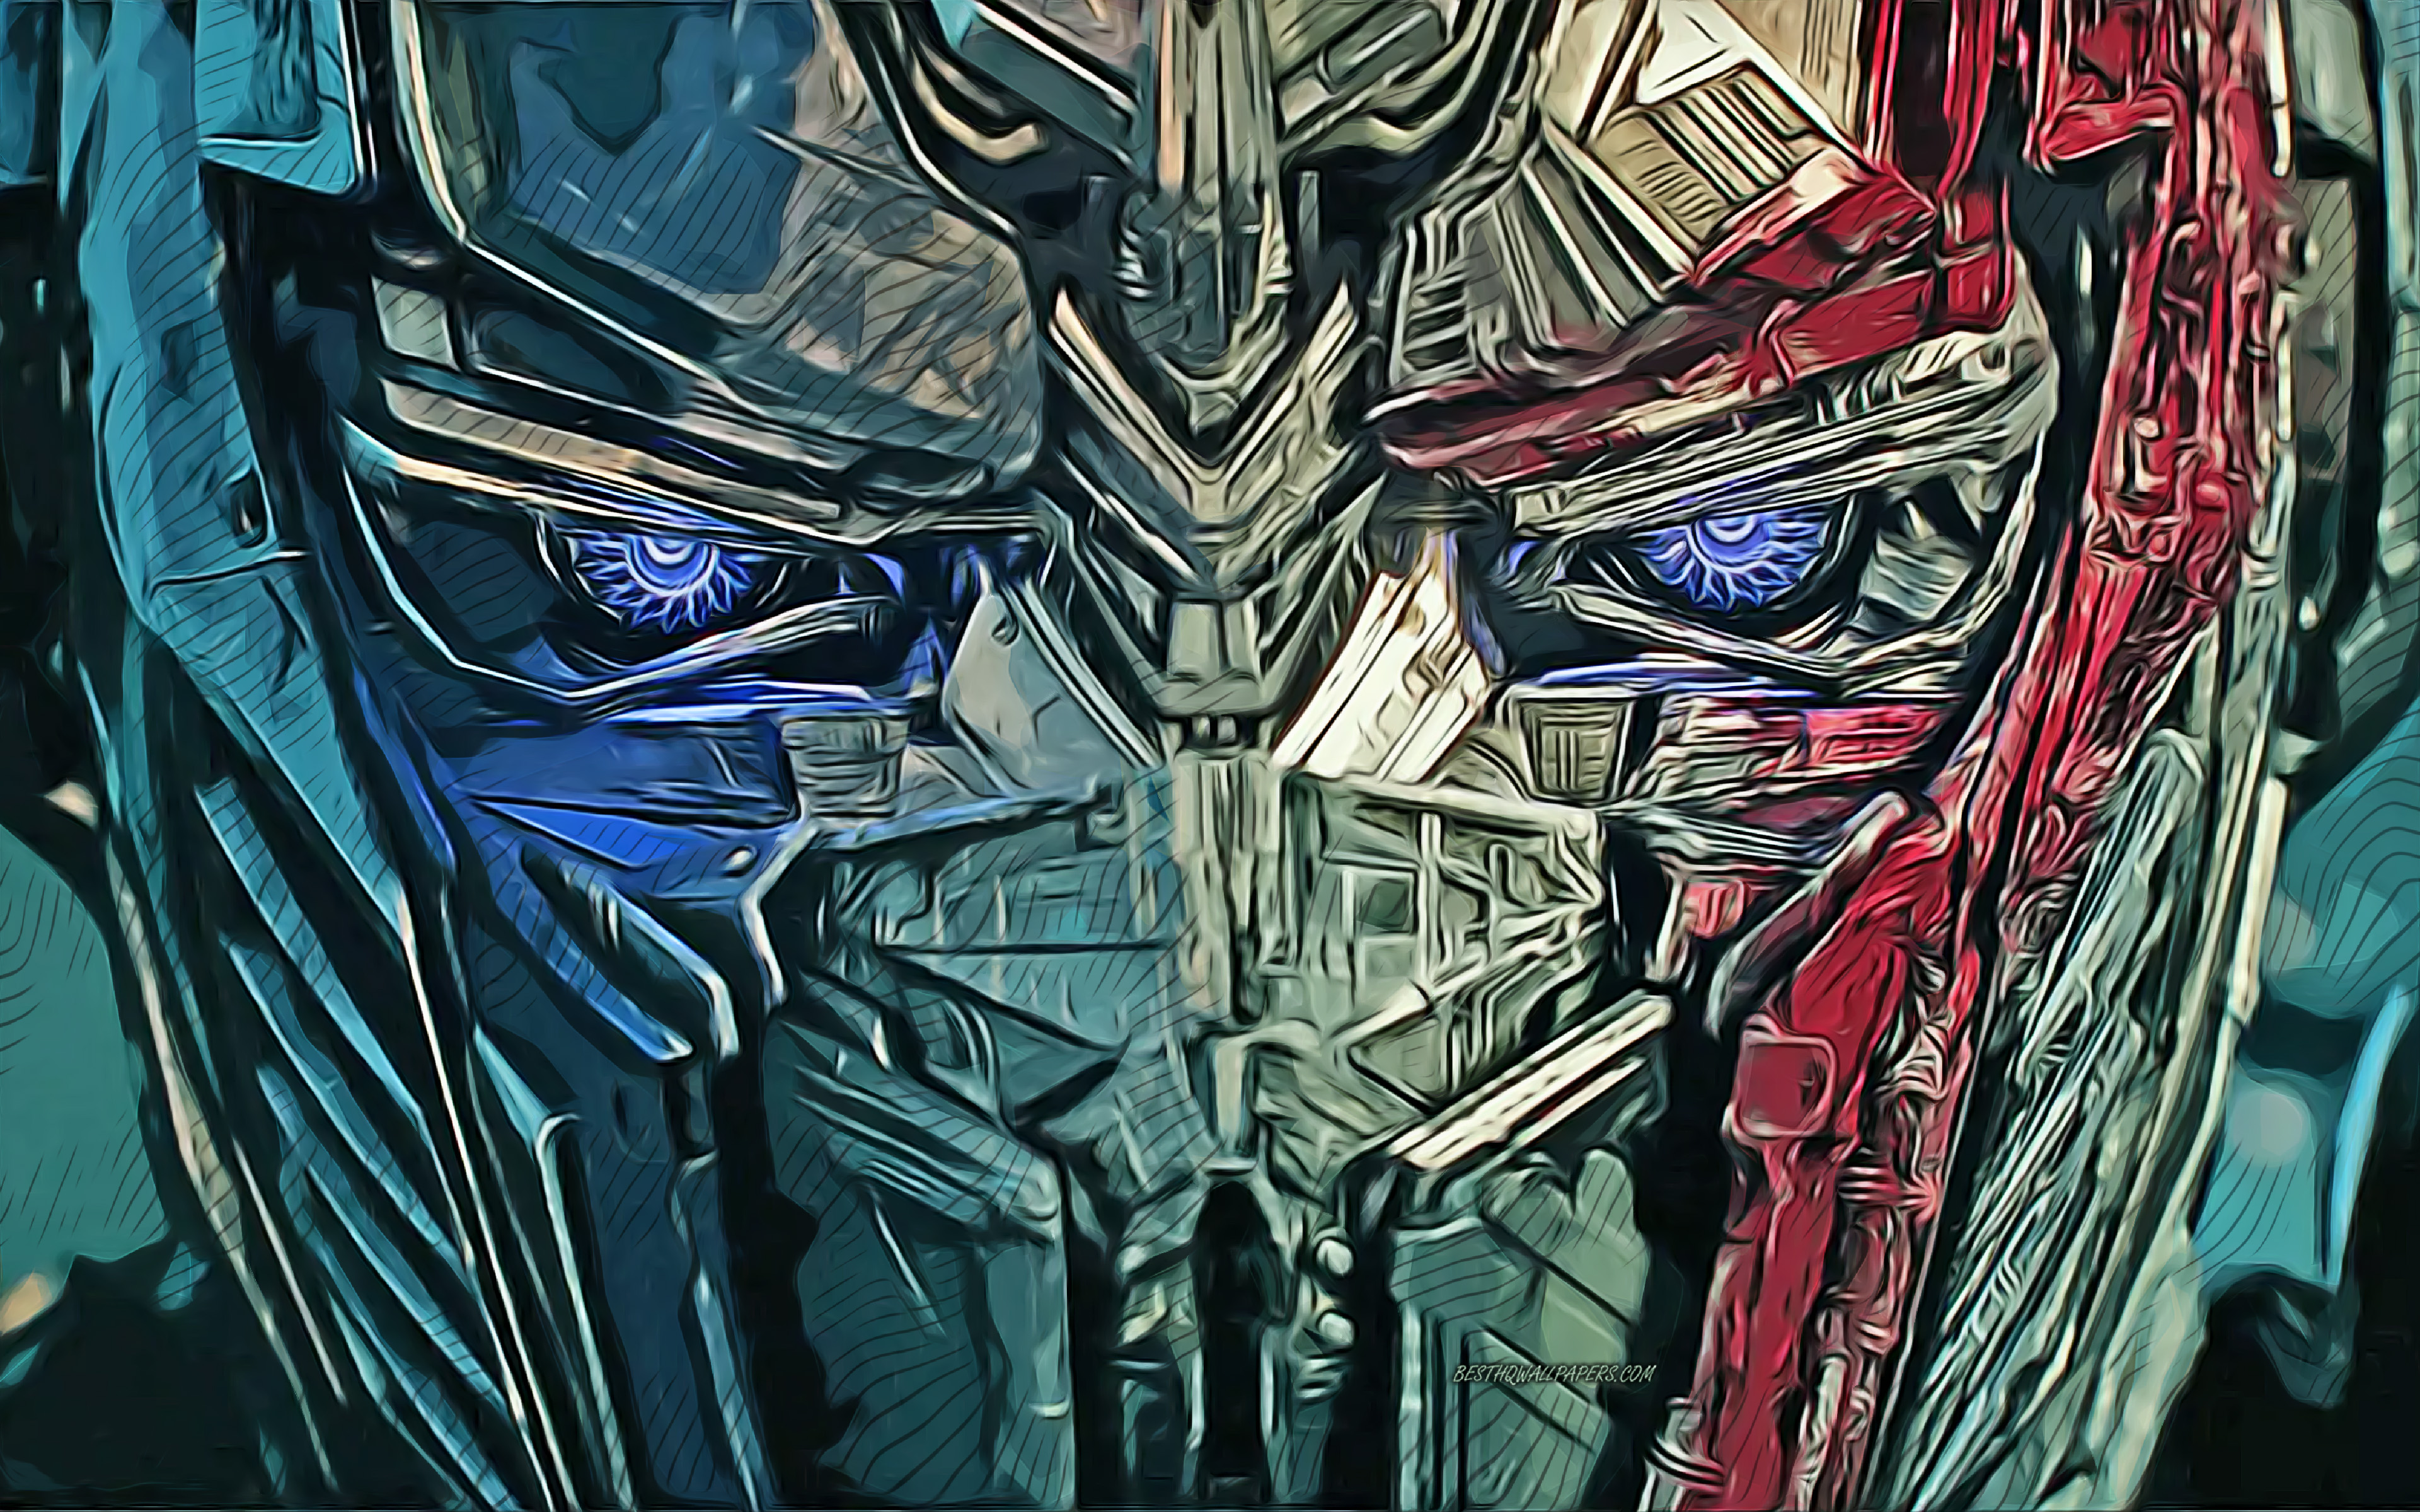 Download wallpaper Megatron, Decepticons, Transformers, 4k, vector art, Megatron drawing, creative art, Megatron art, vector drawing, Transformers characters, Megatron face for desktop with resolution 3840x2400. High Quality HD picture wallpaper